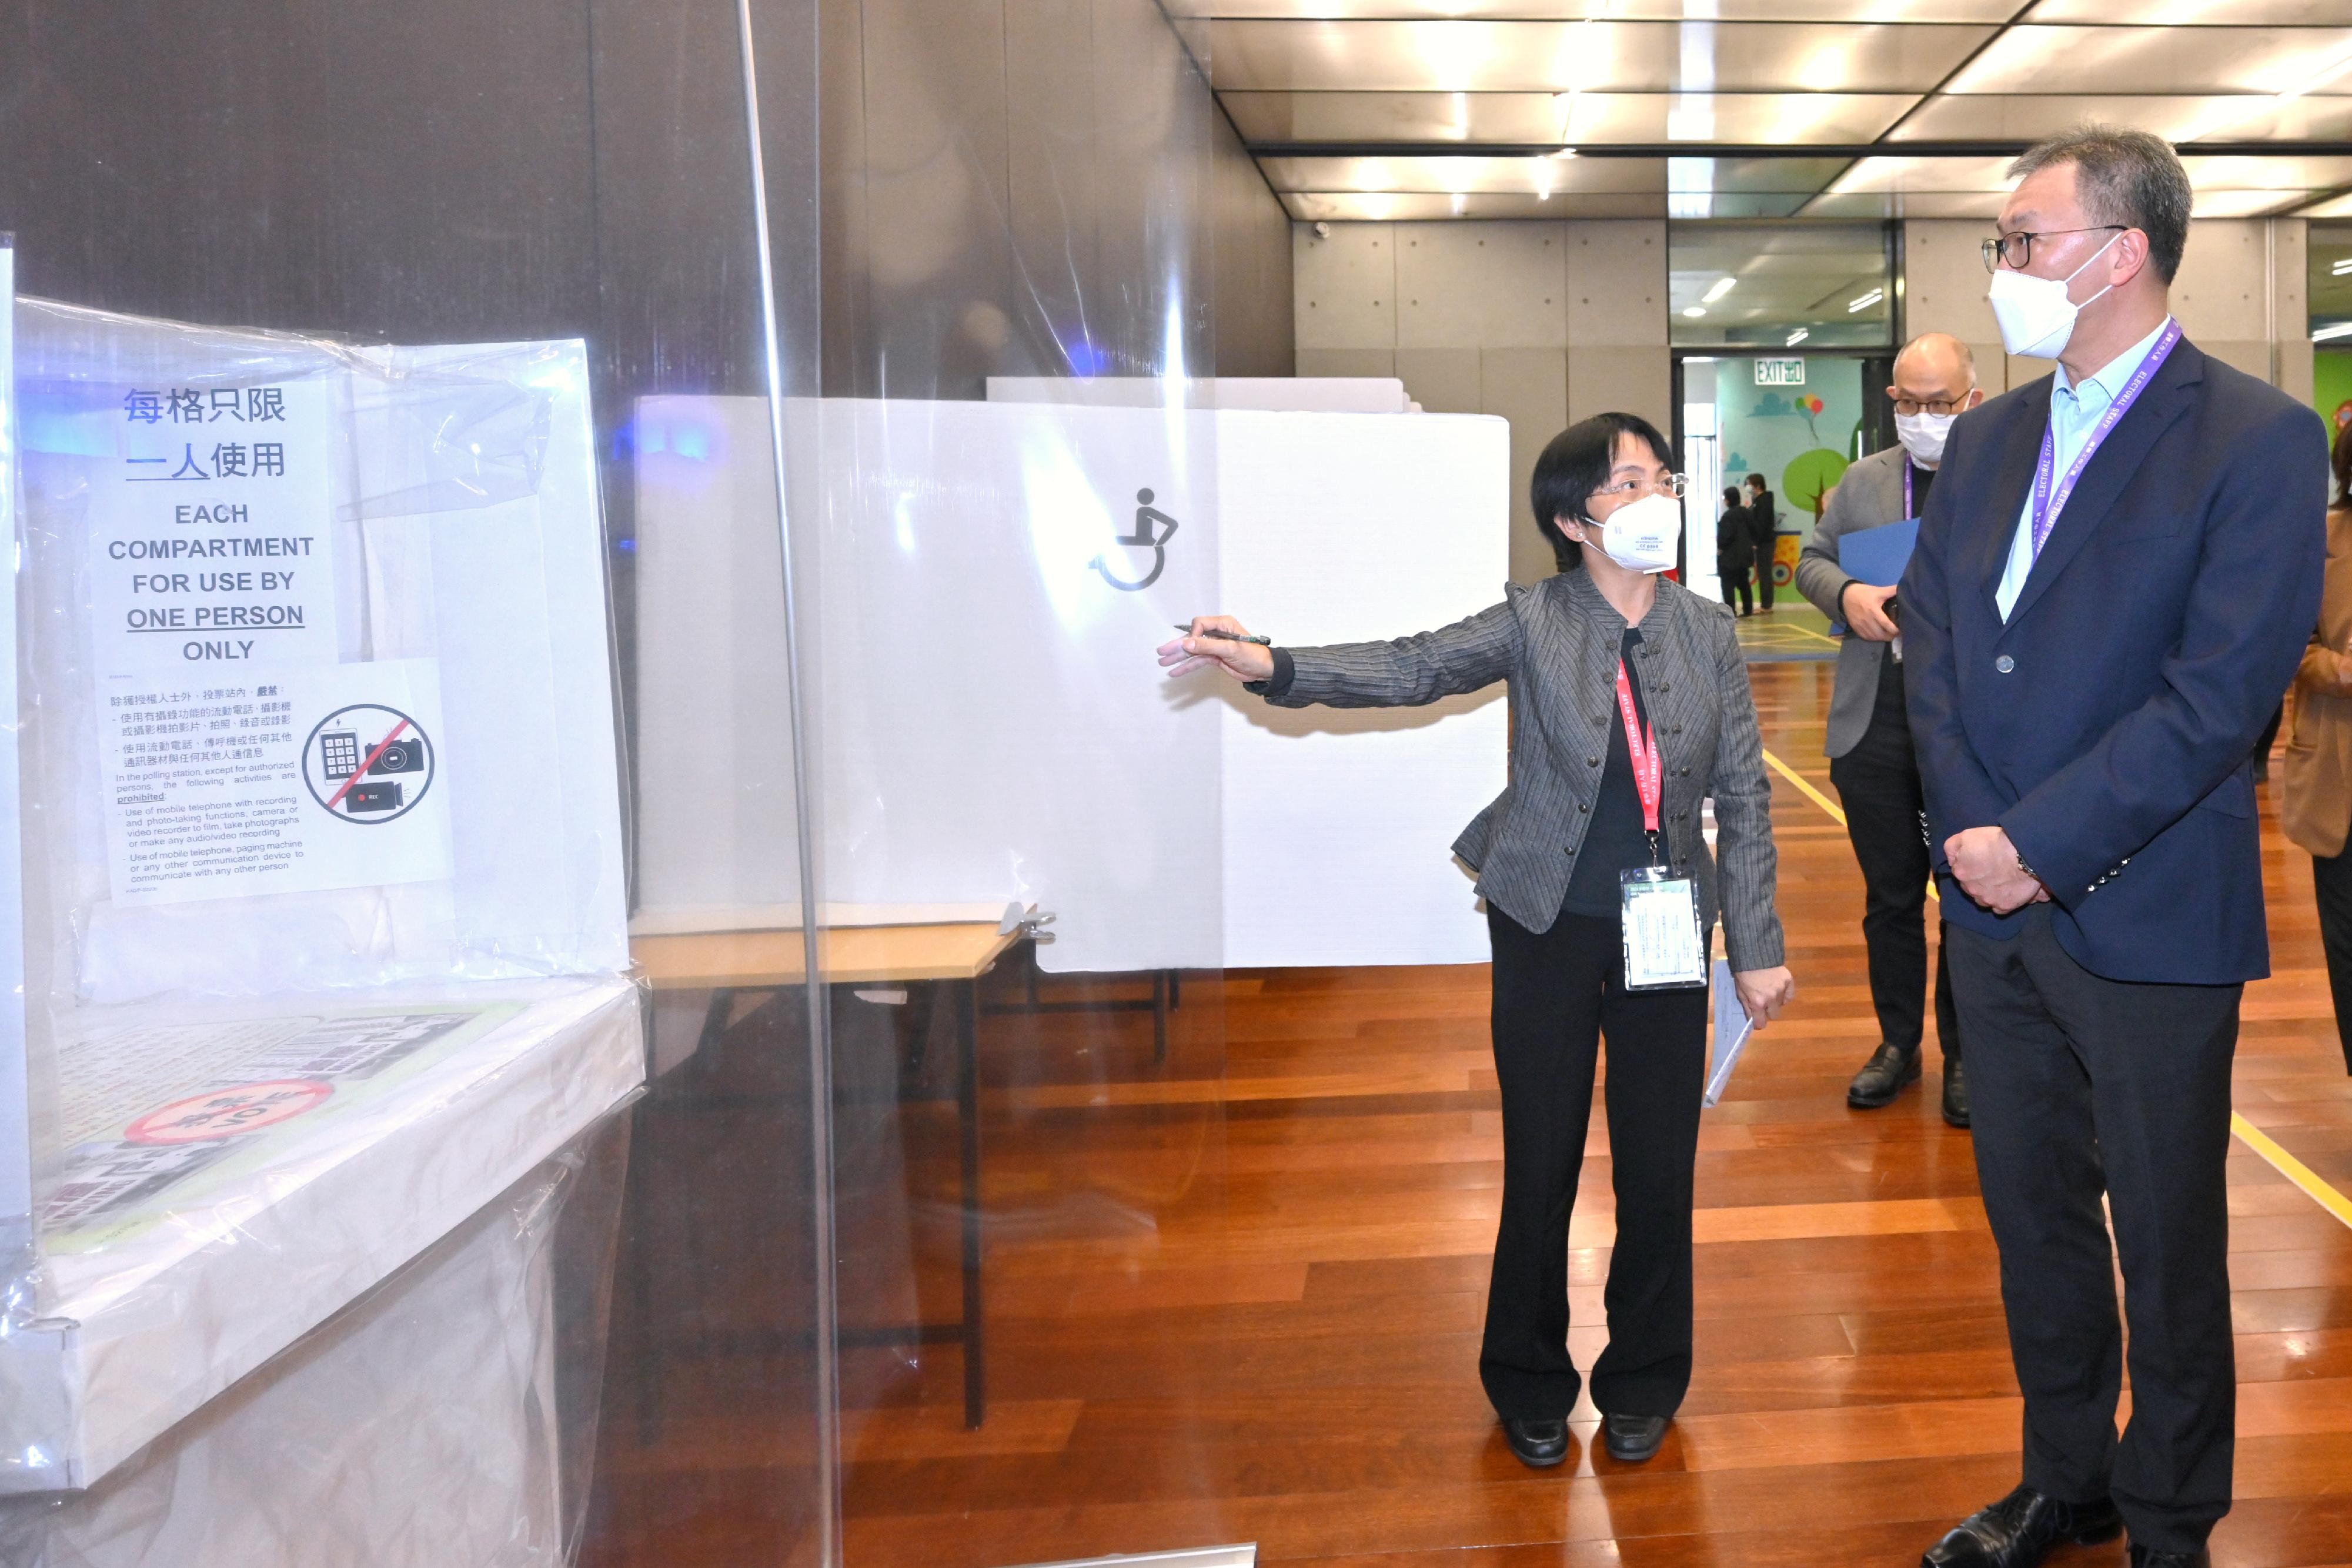 The Chairman of the Electoral Affairs Commission, Mr Justice David Lok (first right), today (January 8) visited the polling station of the Village Representative Election in the 2023 Rural Ordinary Election at Ping Shan Tin Shui Wai Sports Centre to inspect the operation of the polling station.